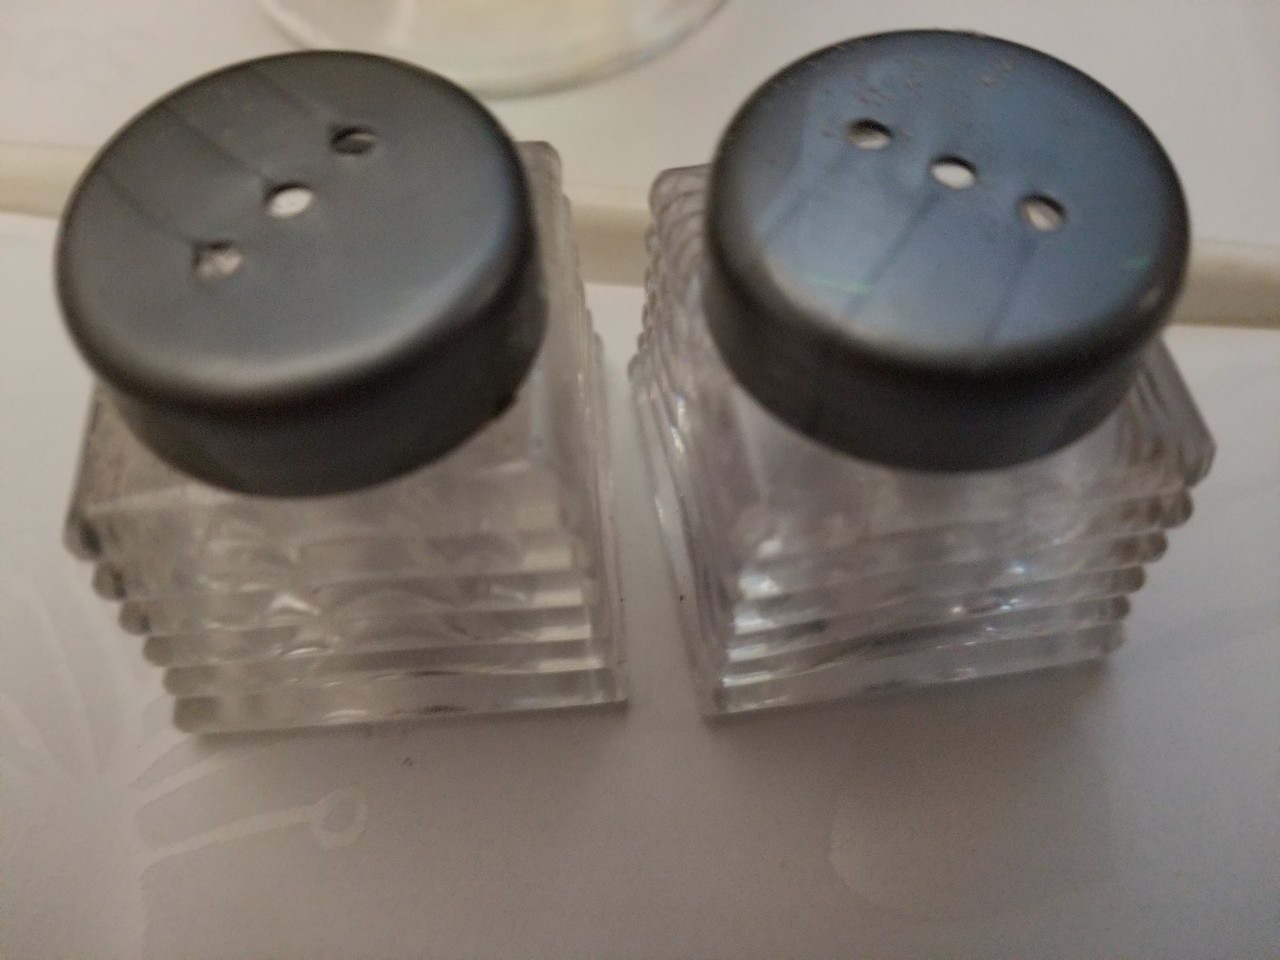 a couple of clear containers with black caps